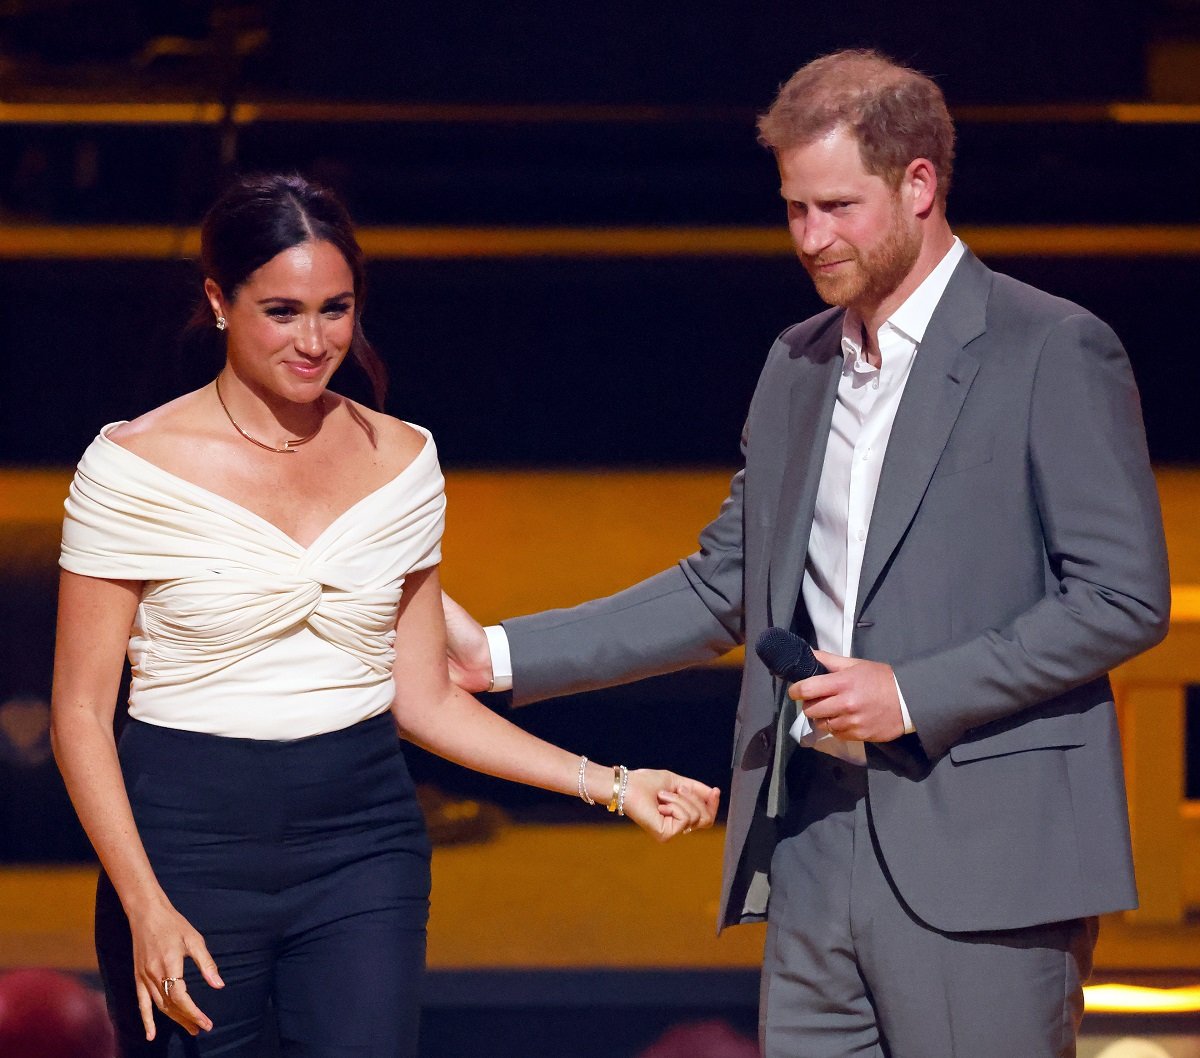 Meghan Markle and Prince Harry on stage during the Opening Ceremony of the Invictus Games at Zuiderpark